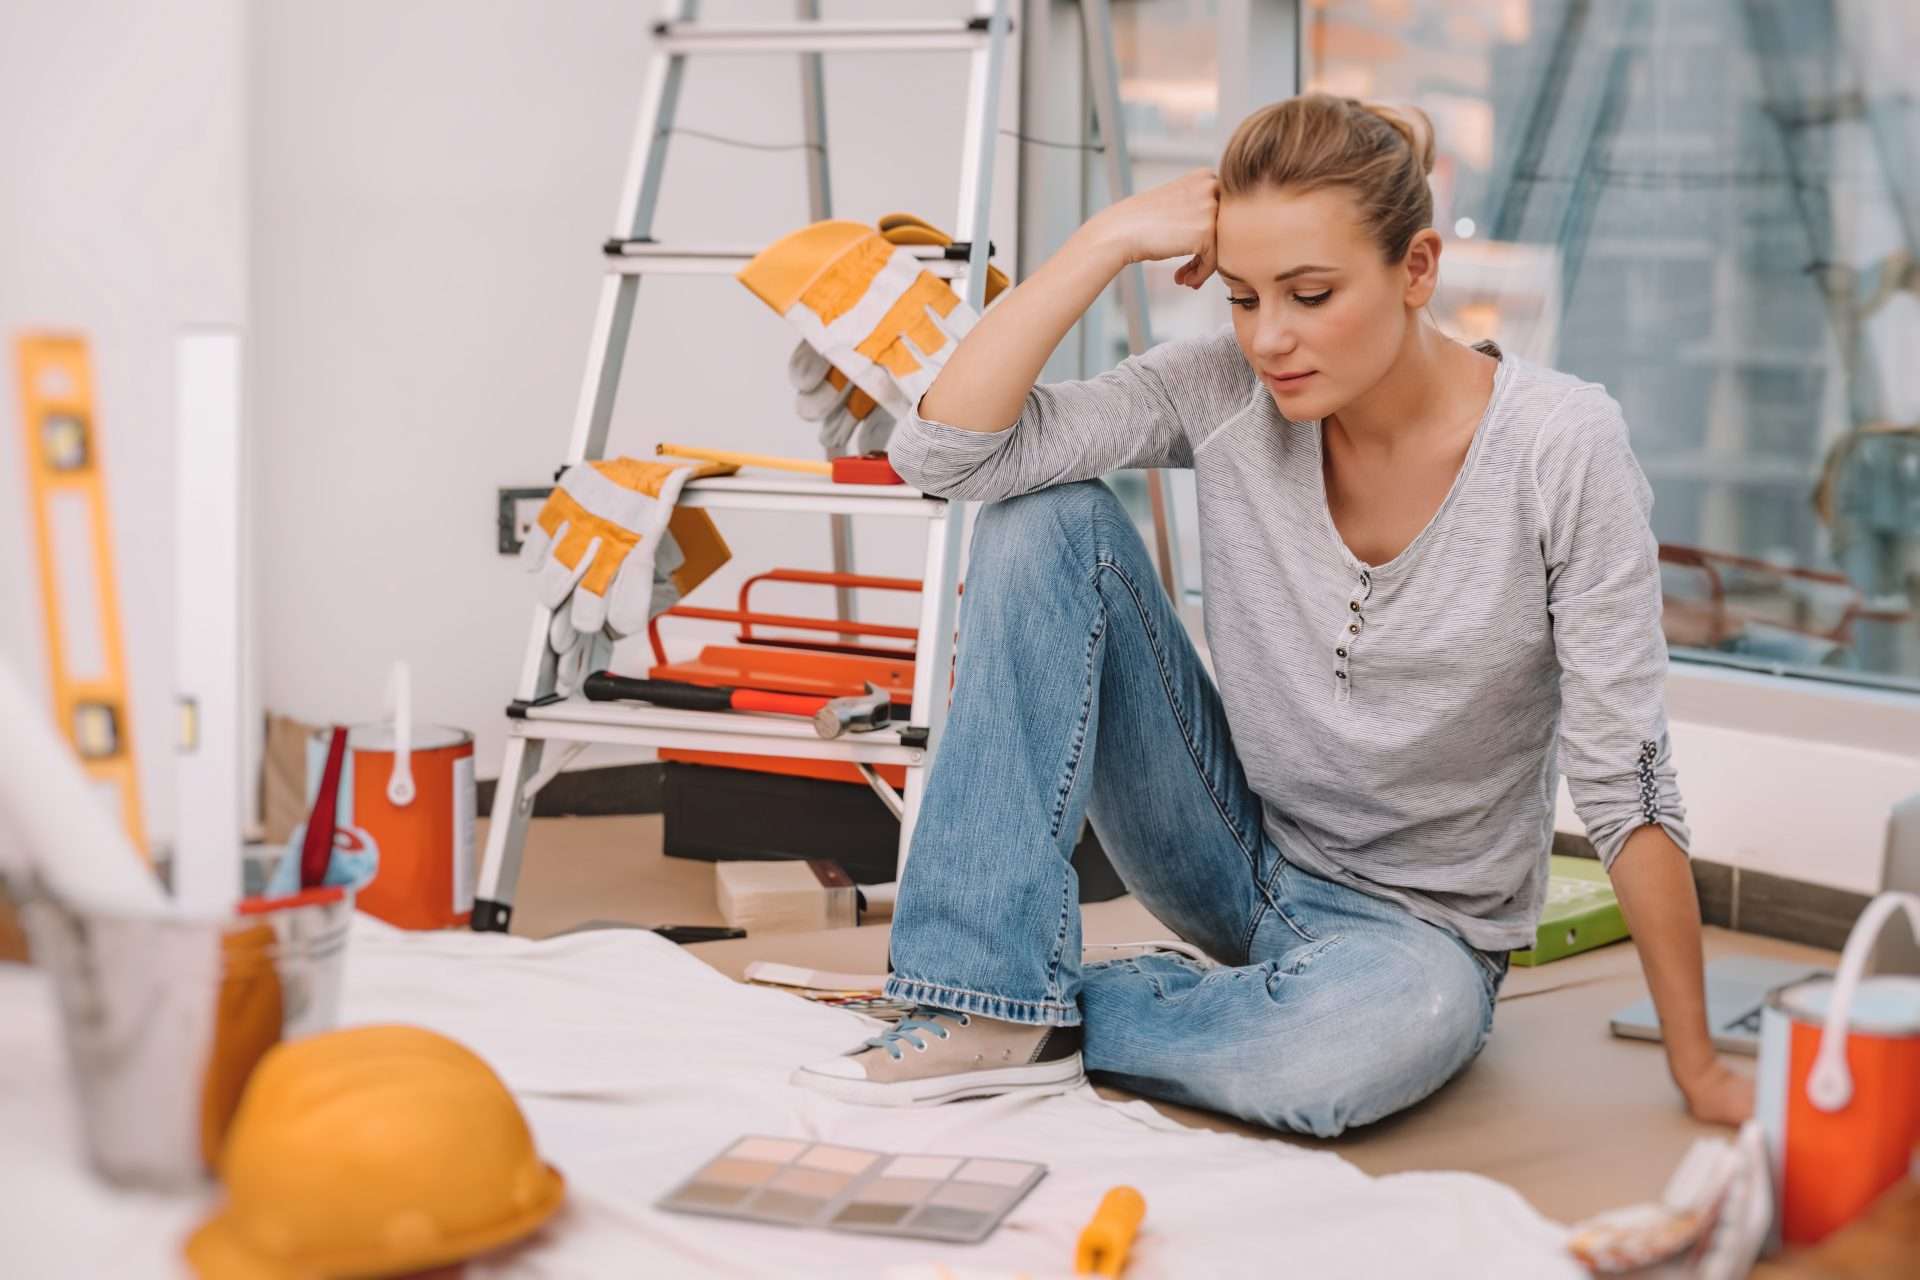 Woman making design decisions while remodeling old camper